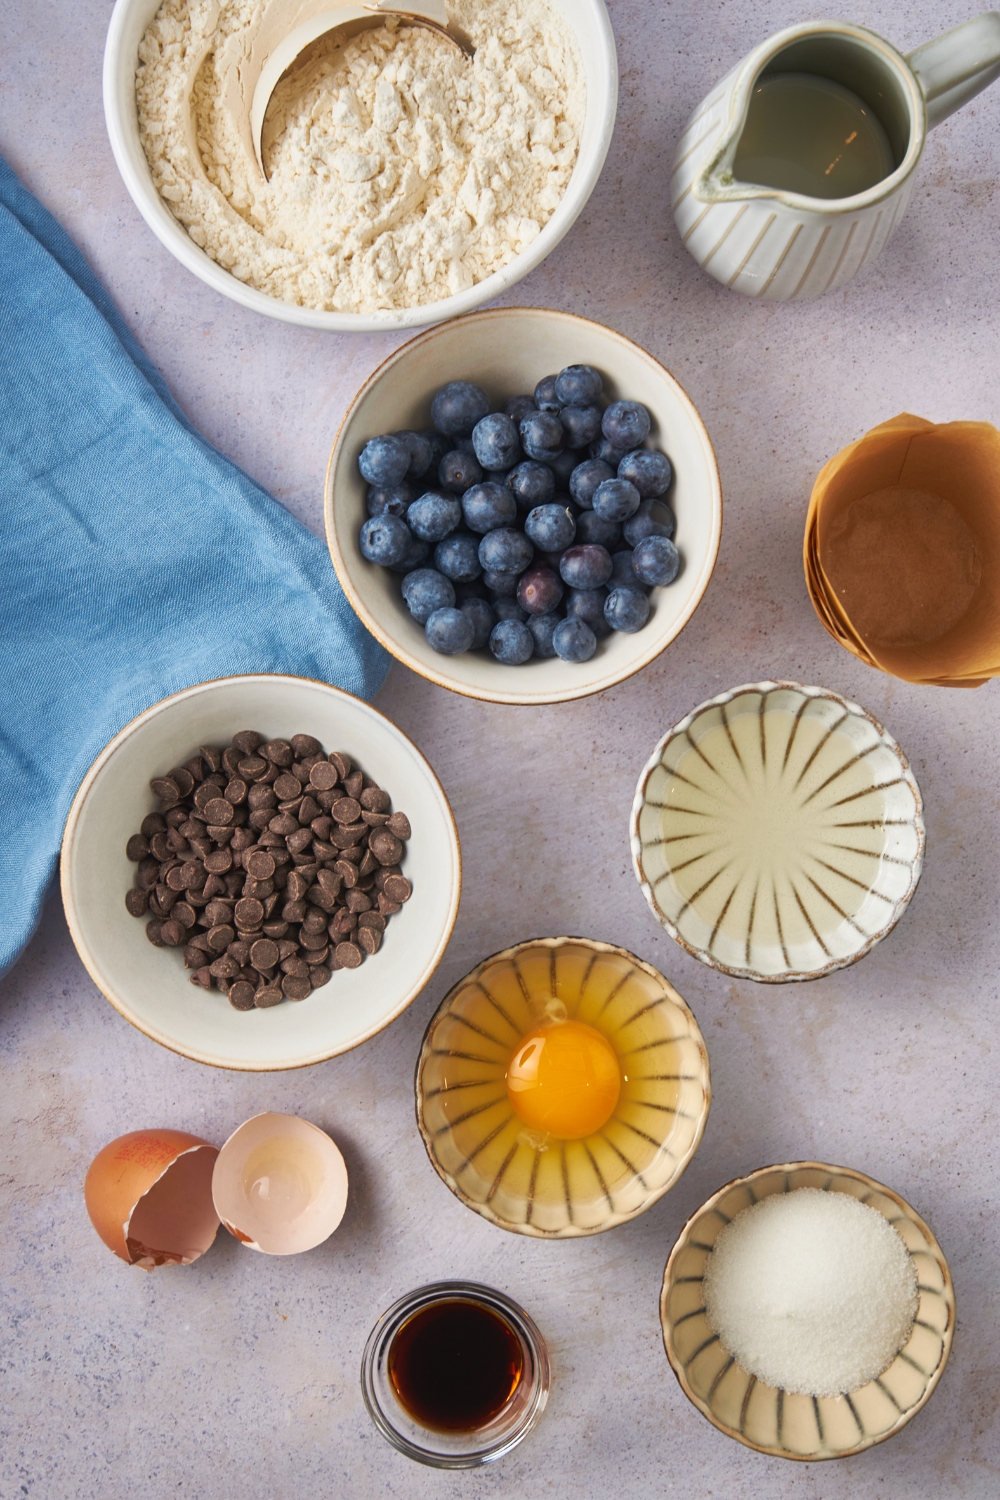 Overhead view of an assortment of ingredients including bowls of blueberries, chocolate chips, an egg, sugar, oil, baking mix, and vanilla extract.